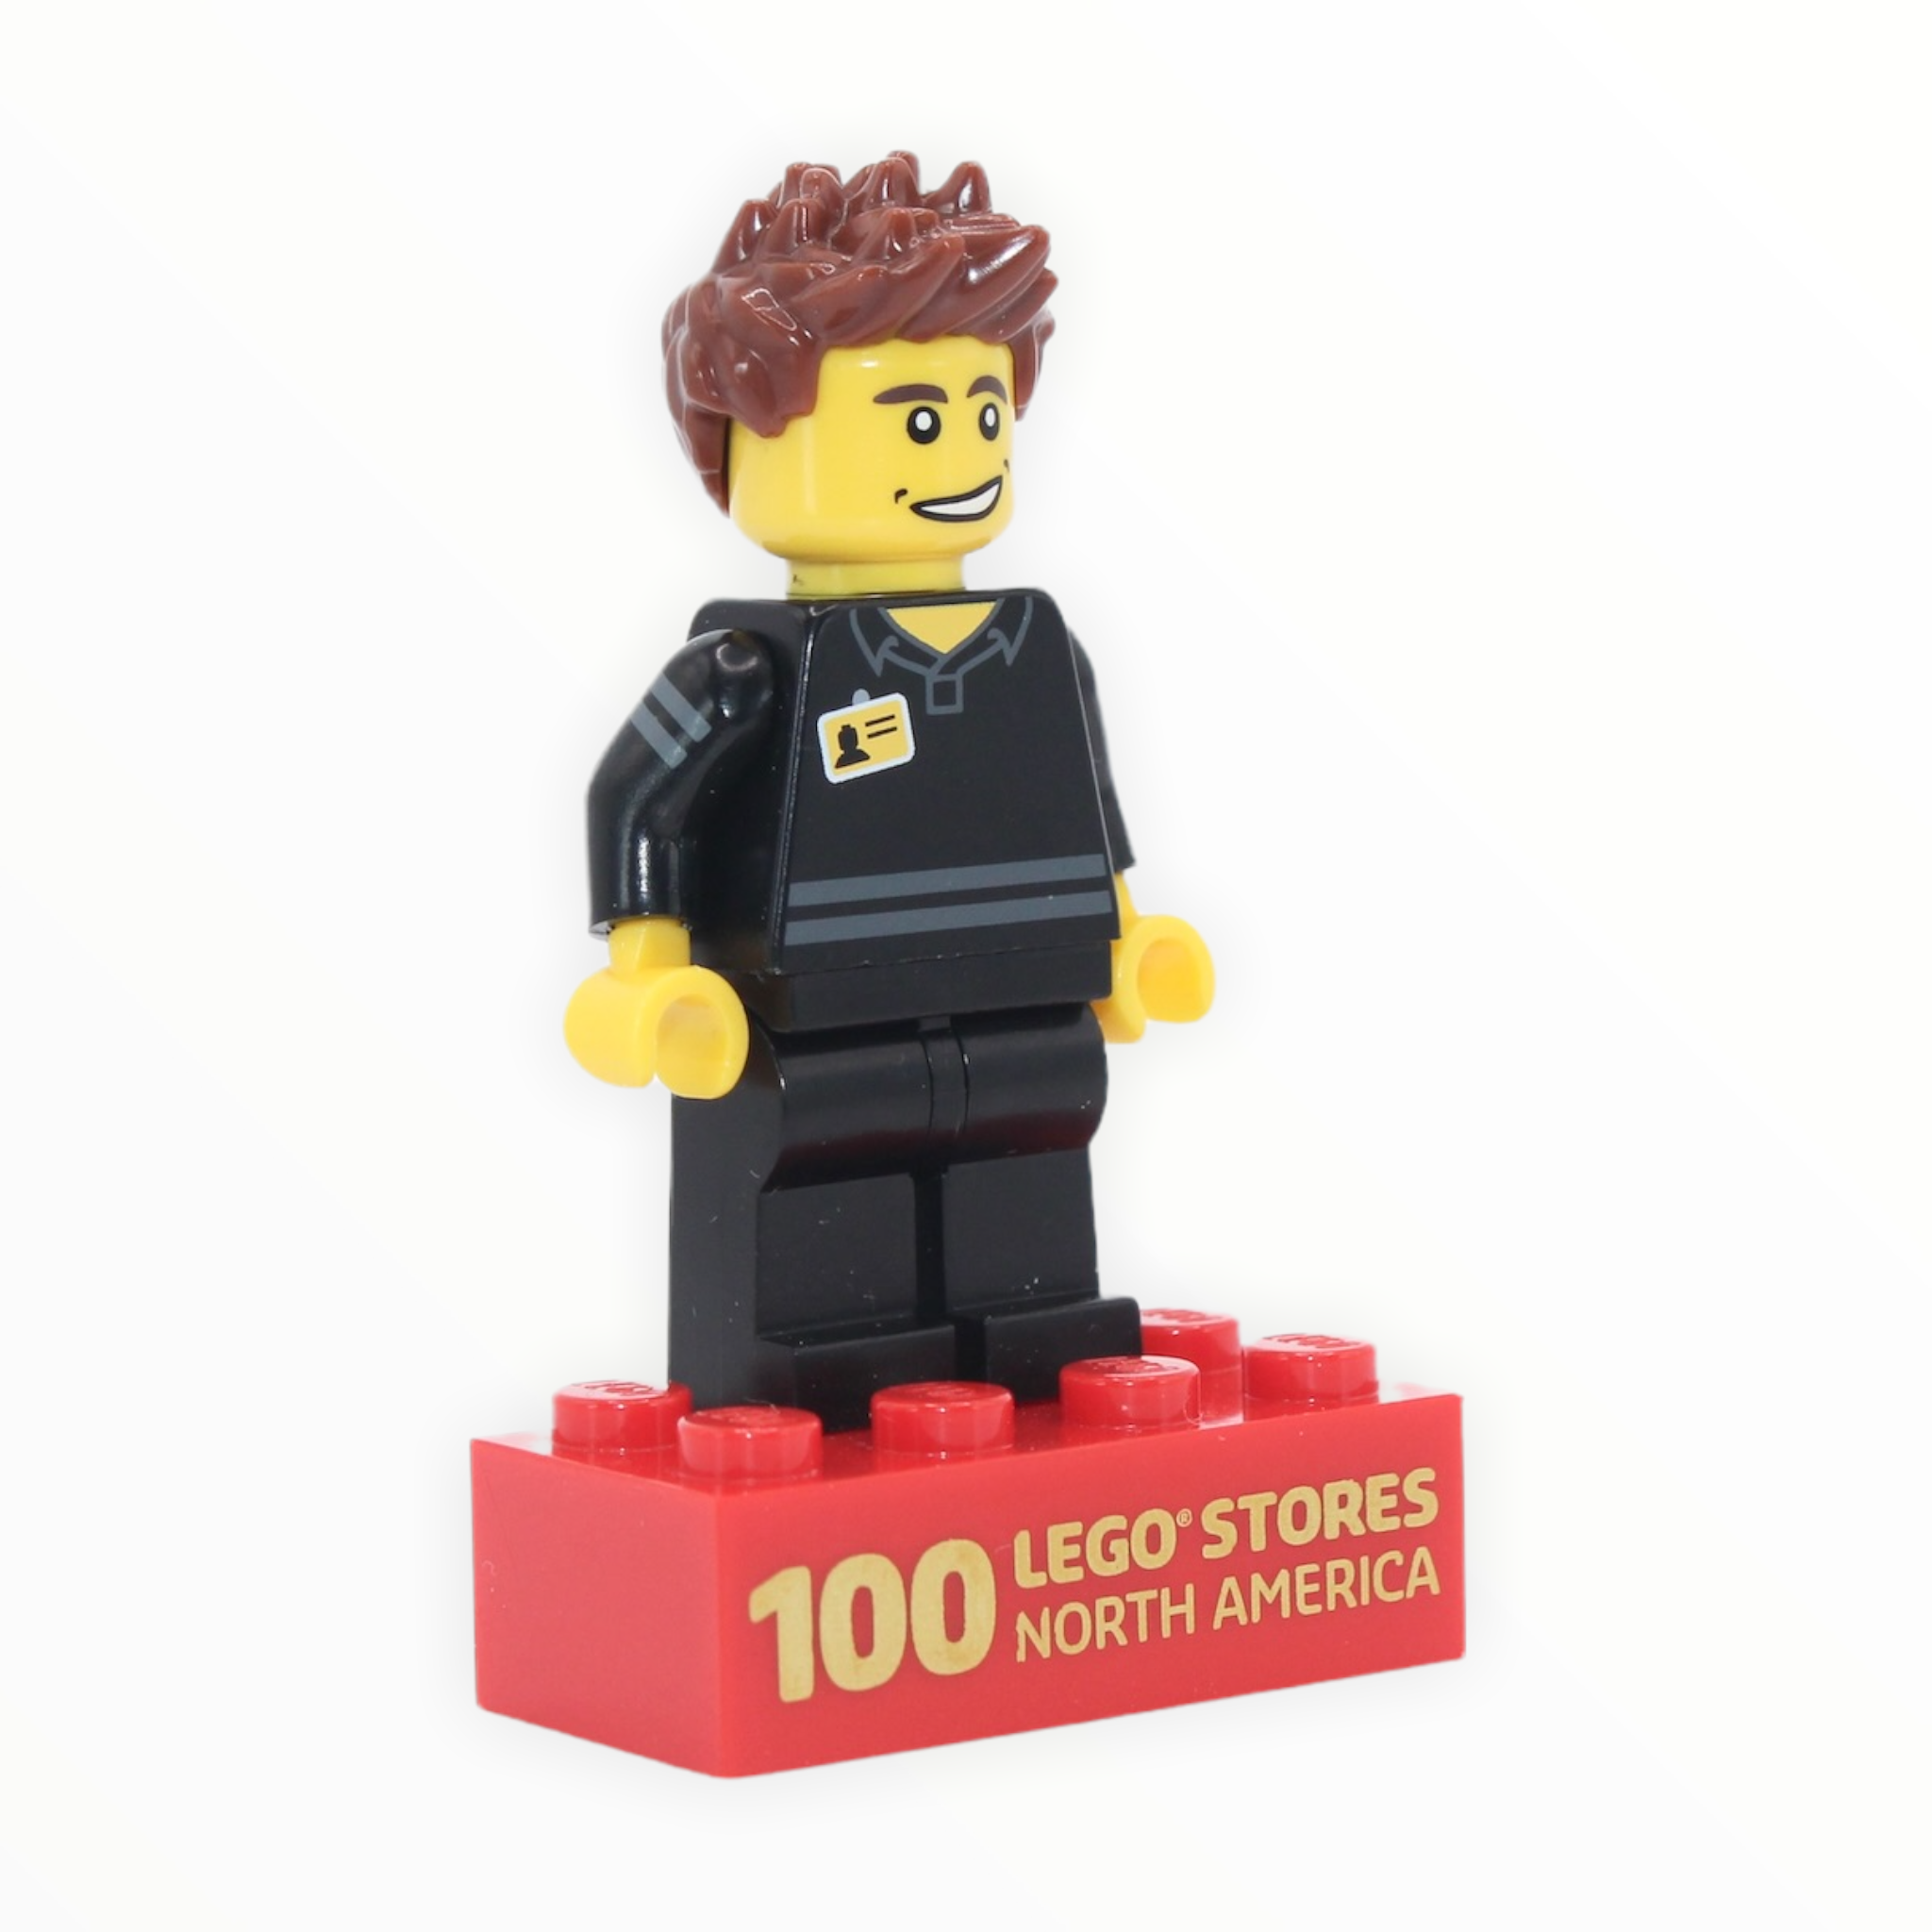 LEGO with 100 LEGO Stores Brick (100 Stores